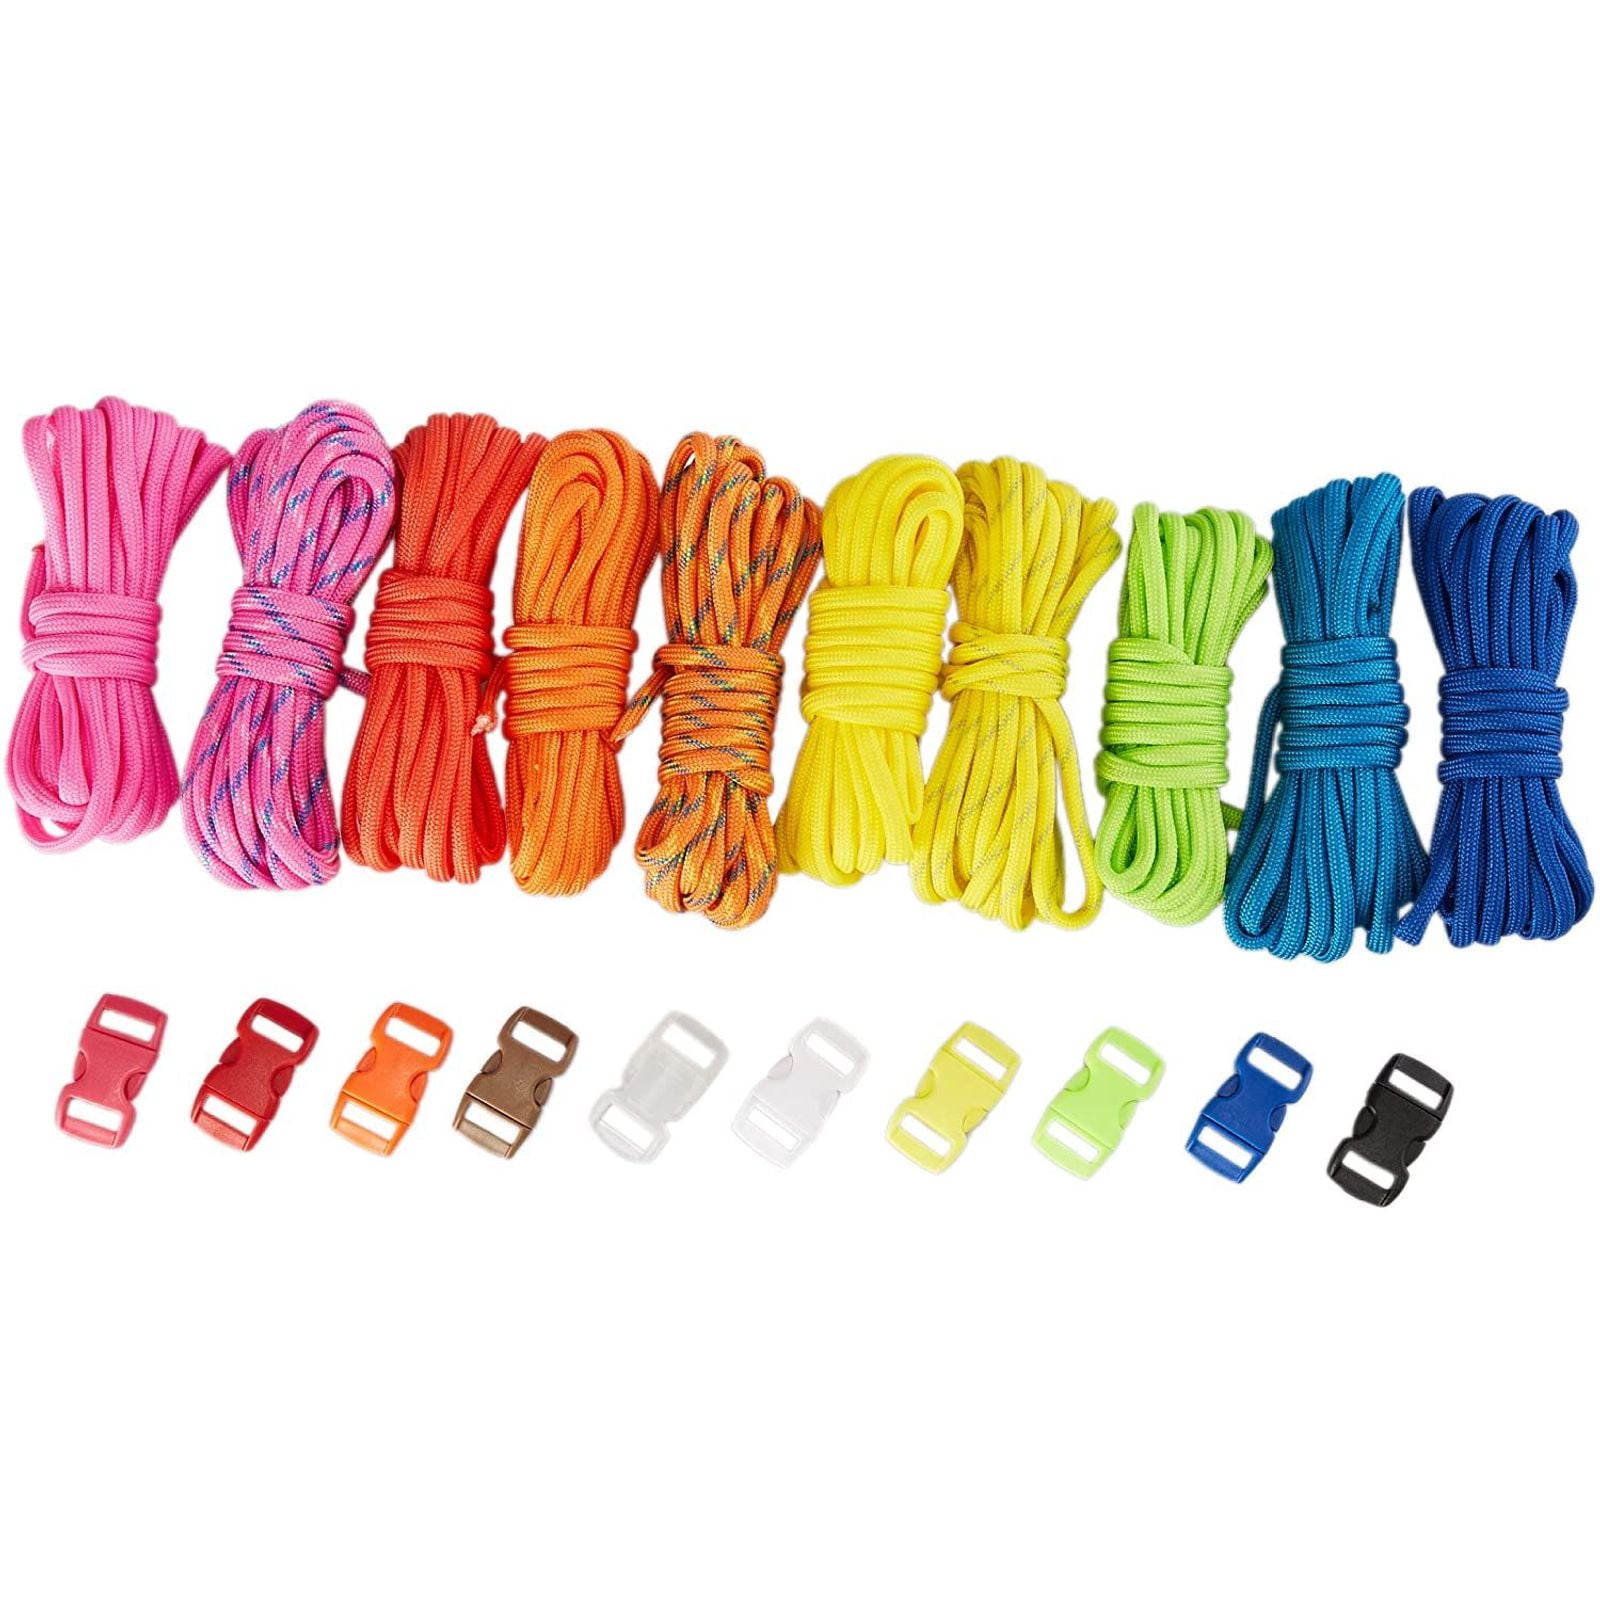 Paracord Survival Rope Bracelet Kit with 50 Feet 550 lb Para Cord & 5 Buckles 